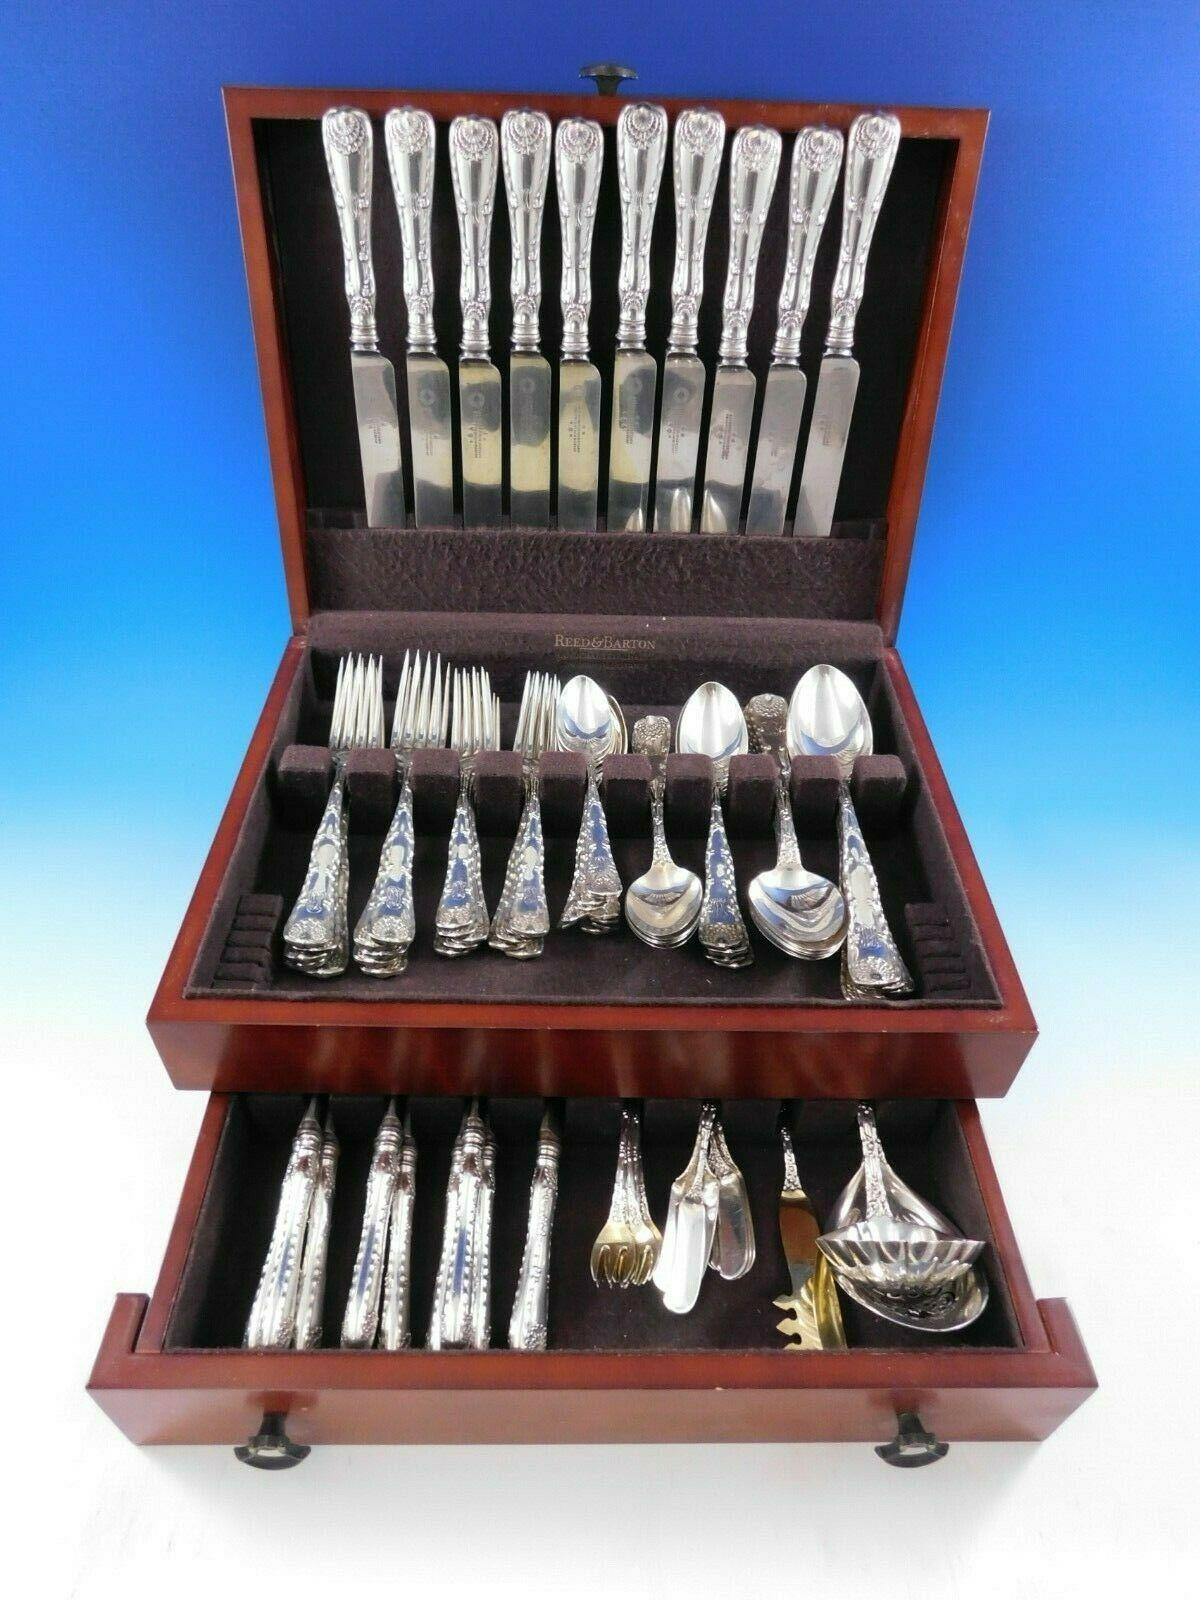 Superb wave edge by Tiffany and Co. sterling silver flatware set, 93 pieces. This set includes:

10 dinner knives, 10 1/2